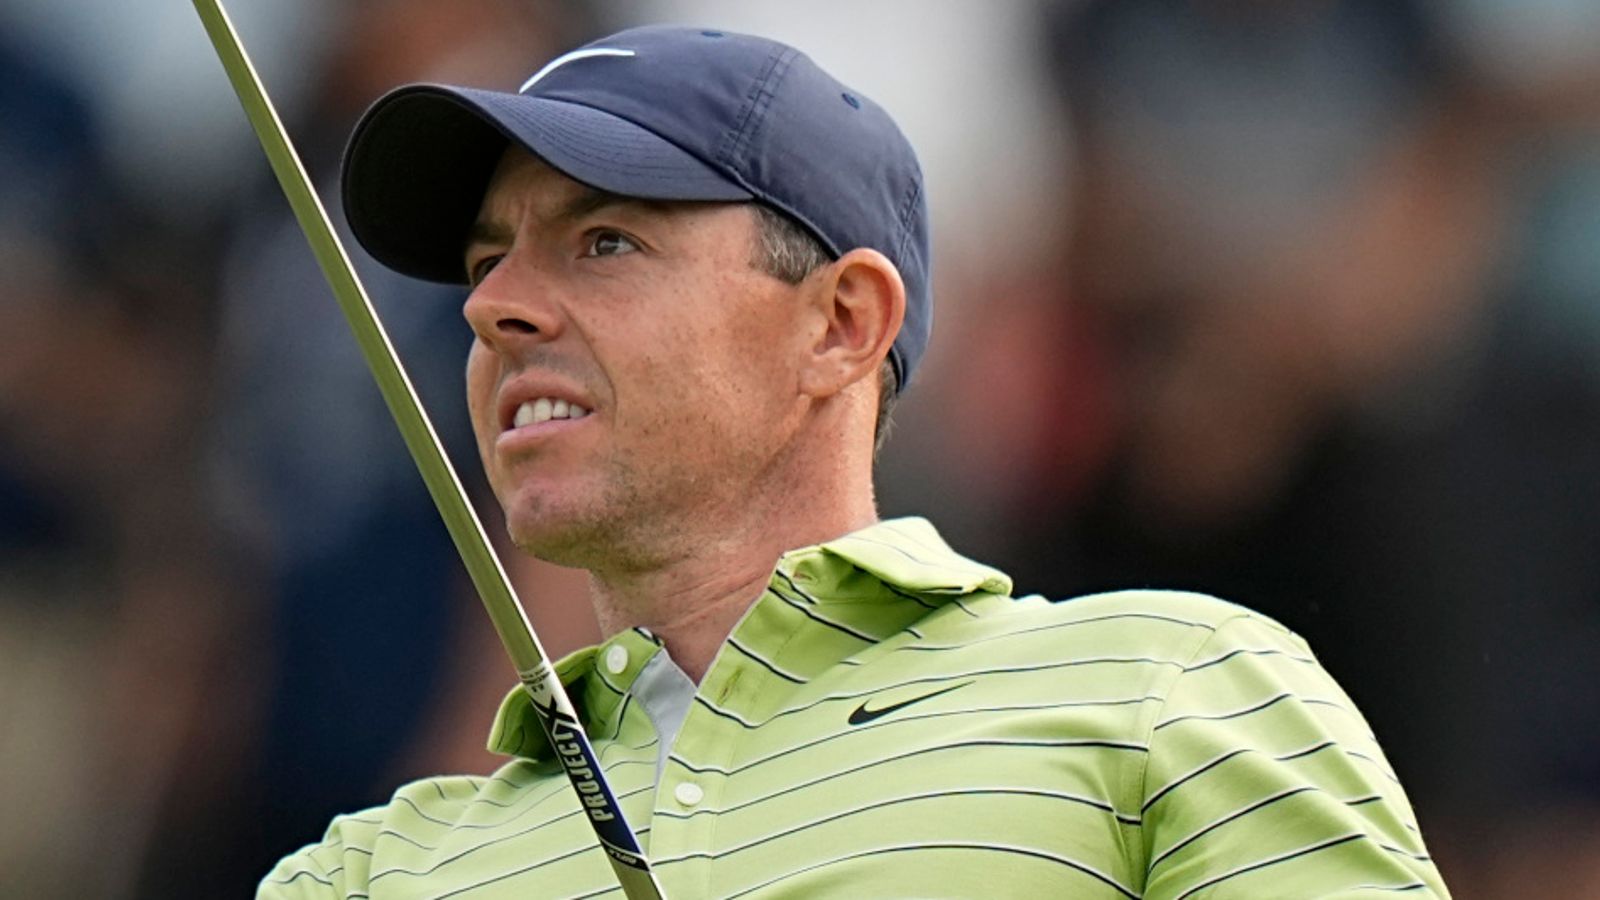 PGA Championship: Rory McIlroy vows to maintain focus after 'great start' at Southern Hills